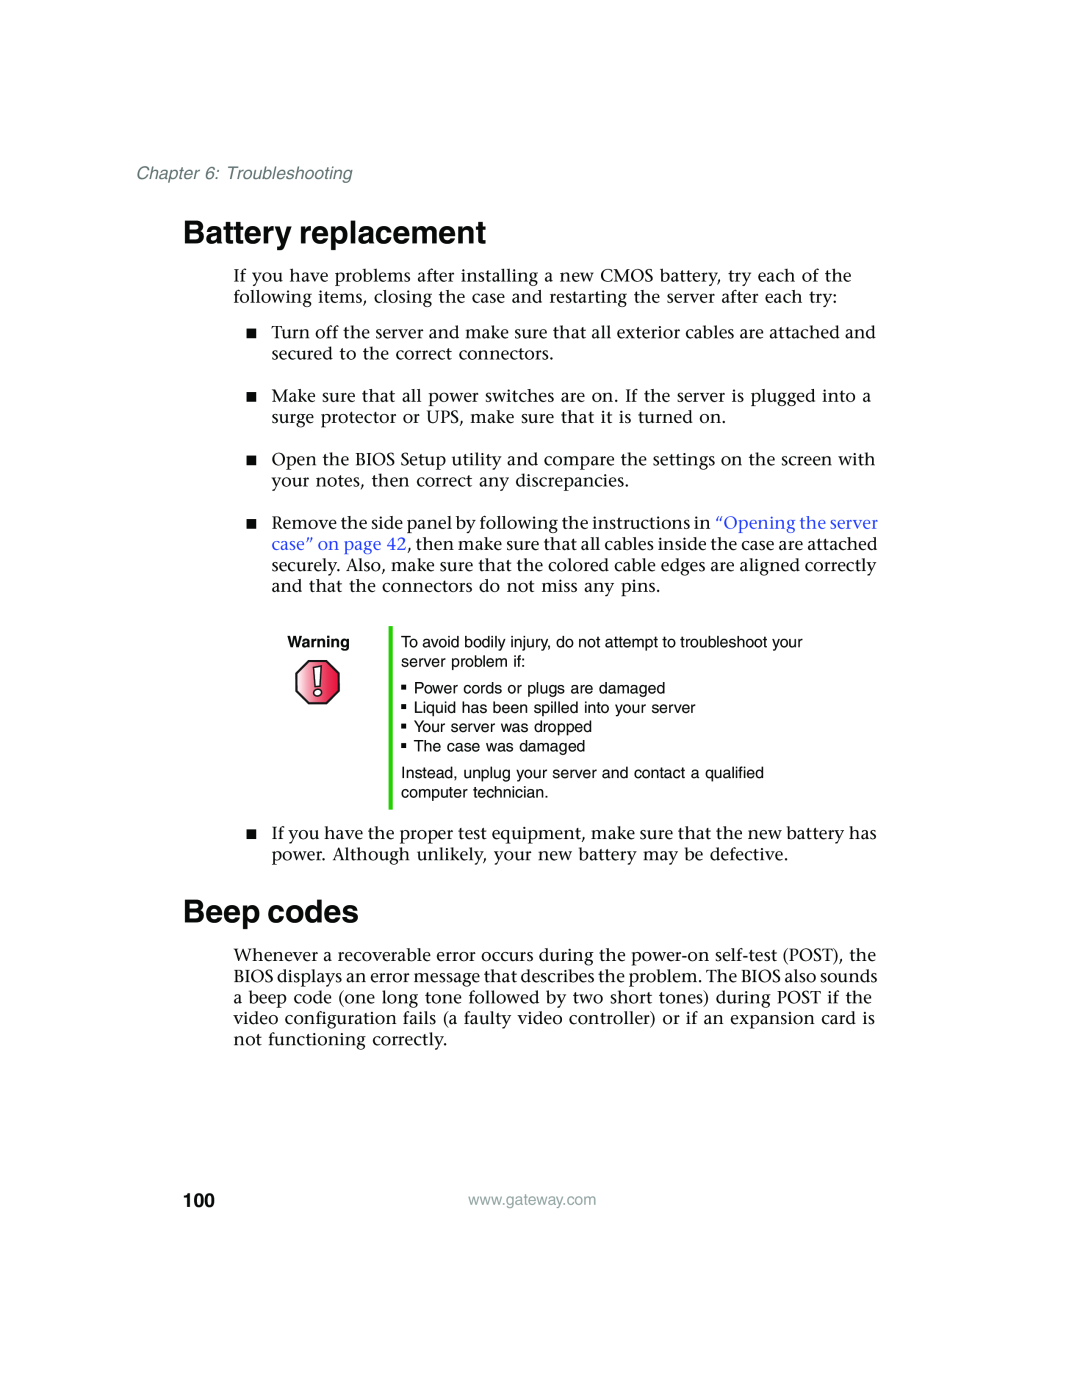 Gateway 960 manual Battery replacement, Beep codes, Troubleshooting 